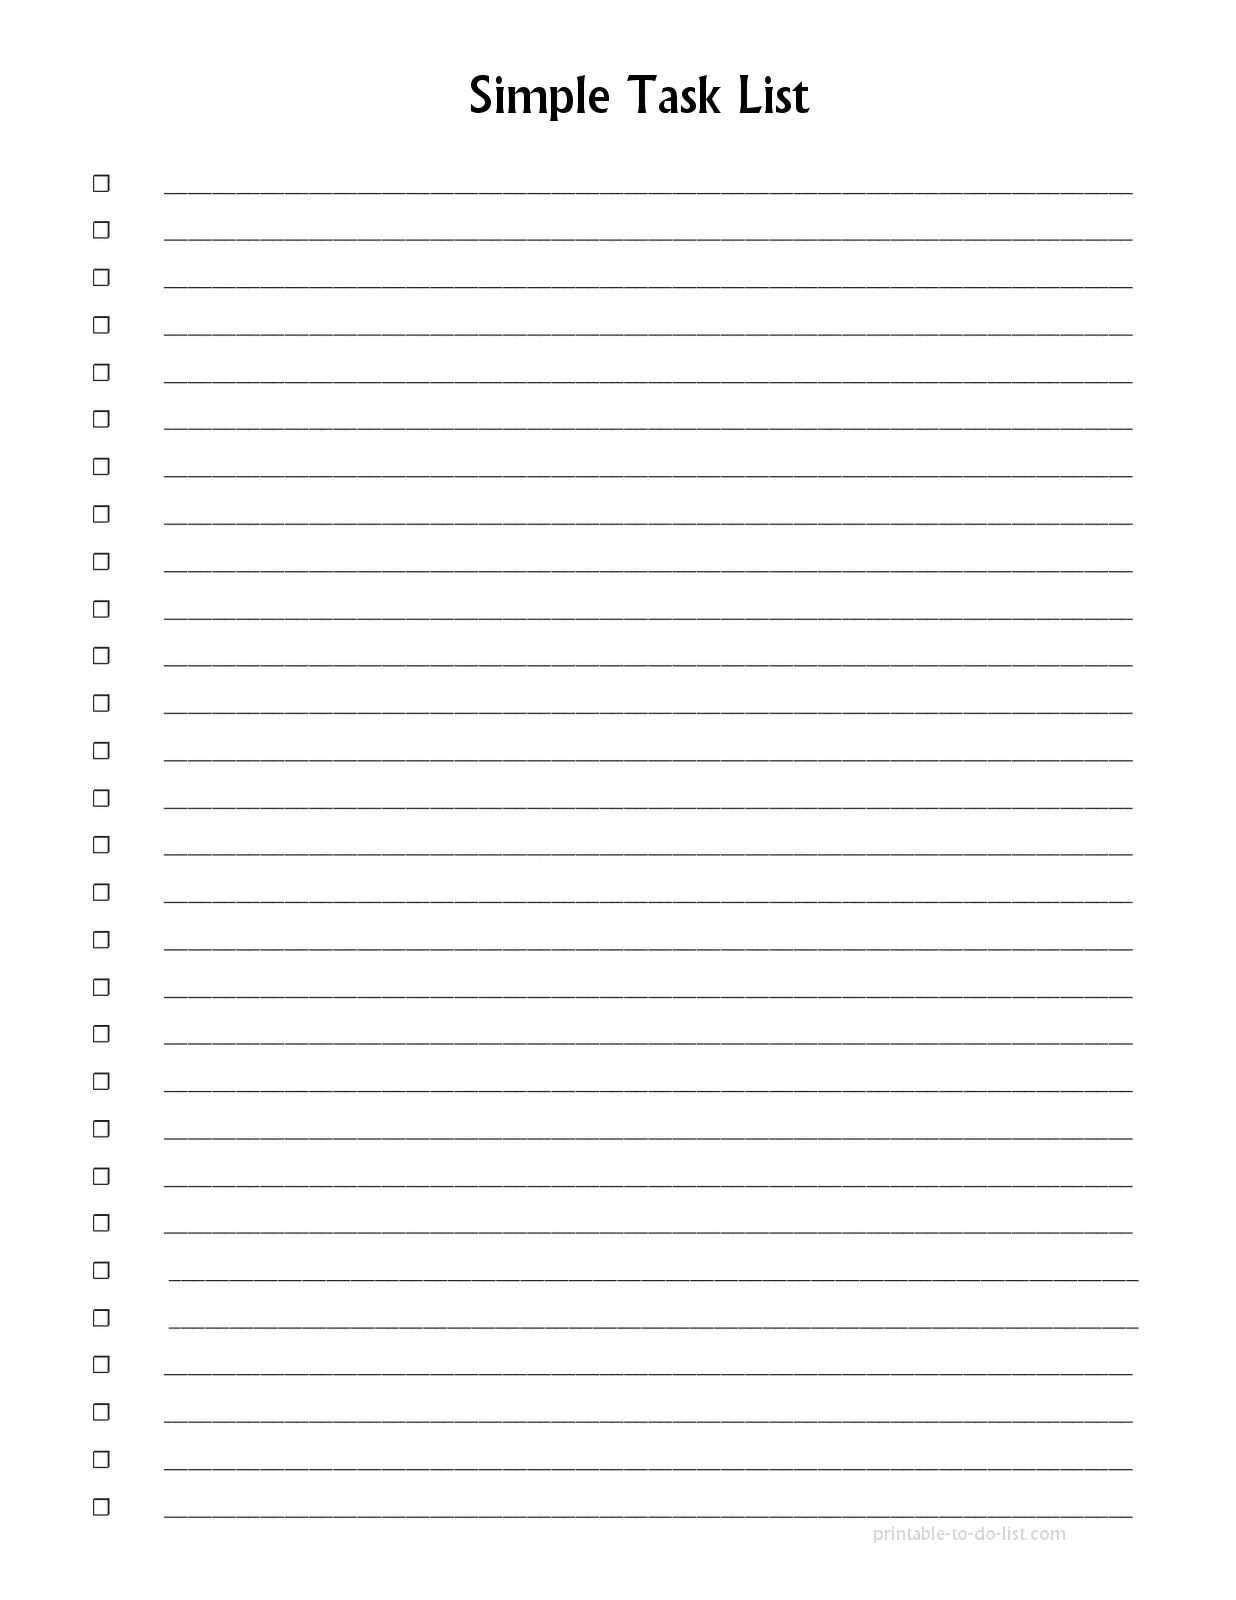 6 Best Images of Cute Printable Blank List - Printable Shopping List